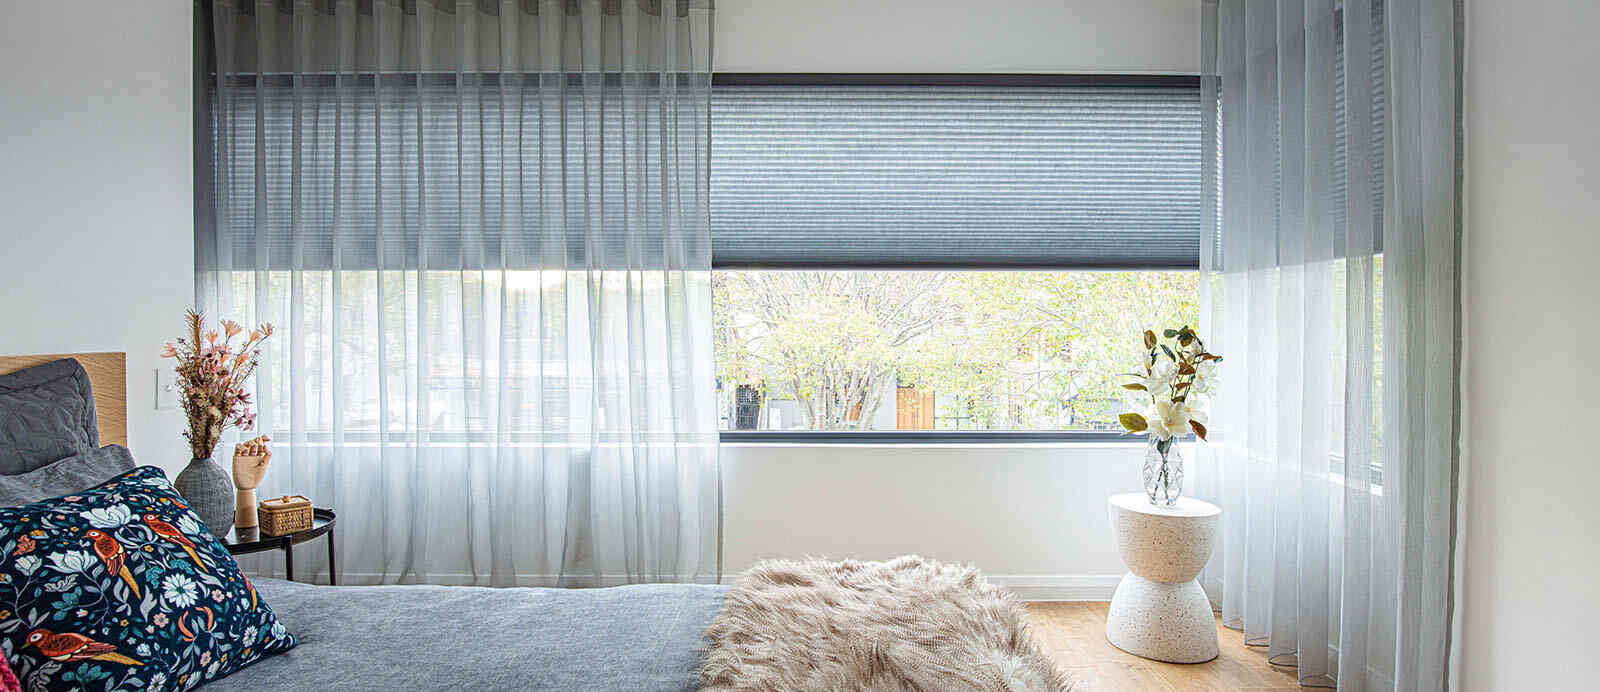 honeycomb blinds with sheer curtains